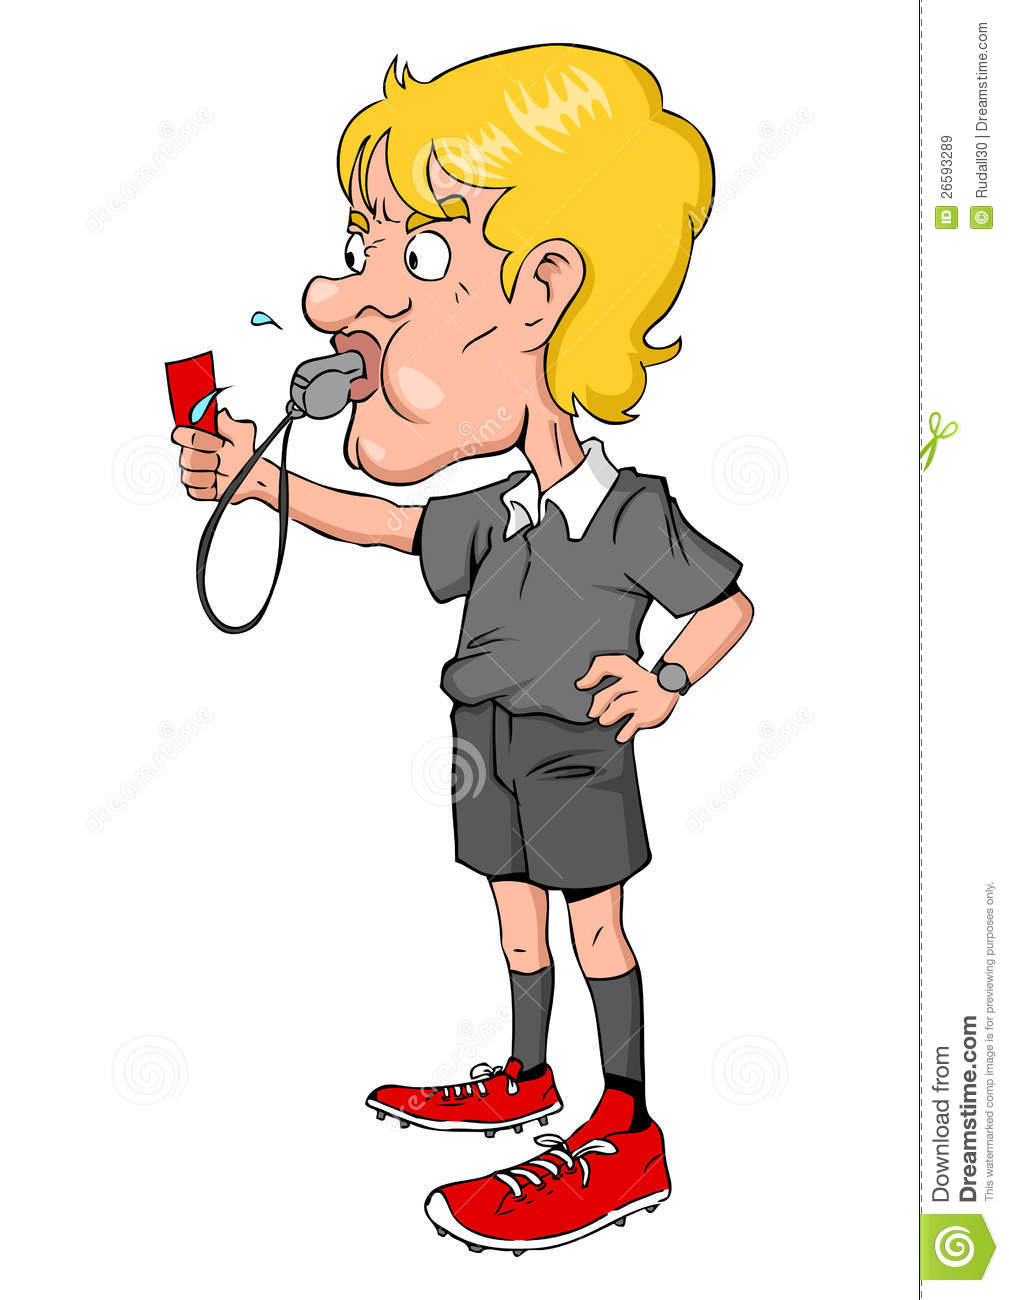 Referee Royalty Free Stock Images   Image  26593289